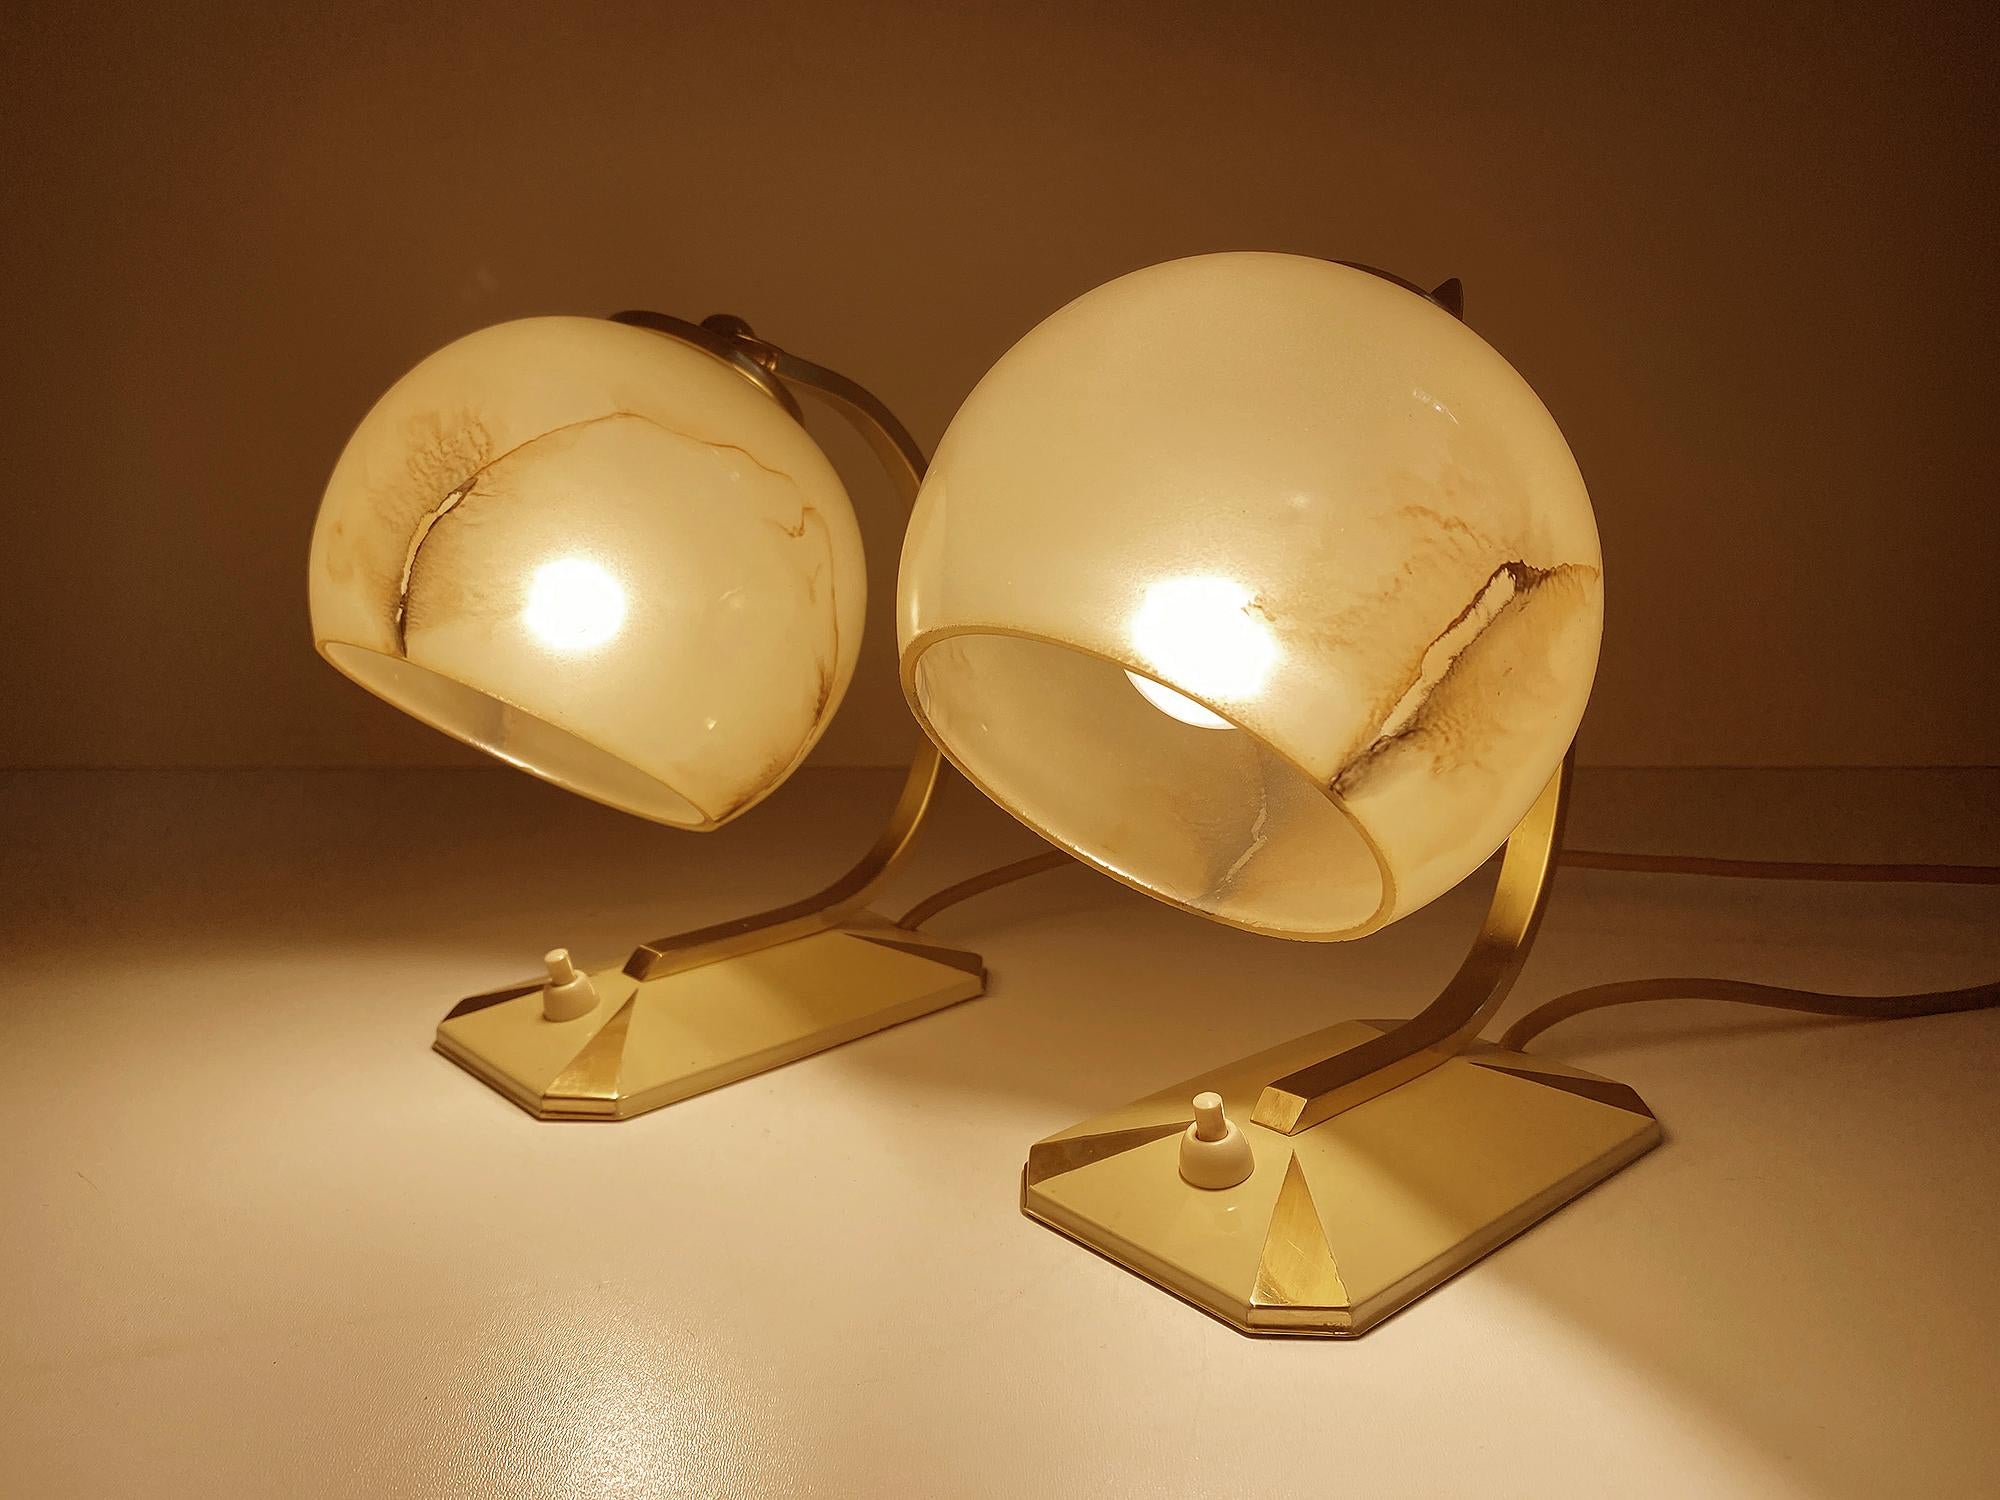 Gorgeous pair of Art Deco table lamps, featuring an octagonal base with a cream enamel and brass pattern base, cradle shaped stems and caps, stunning marbleized opaline overlay glass shades, cream white with brownish beige highlights. The shade’s